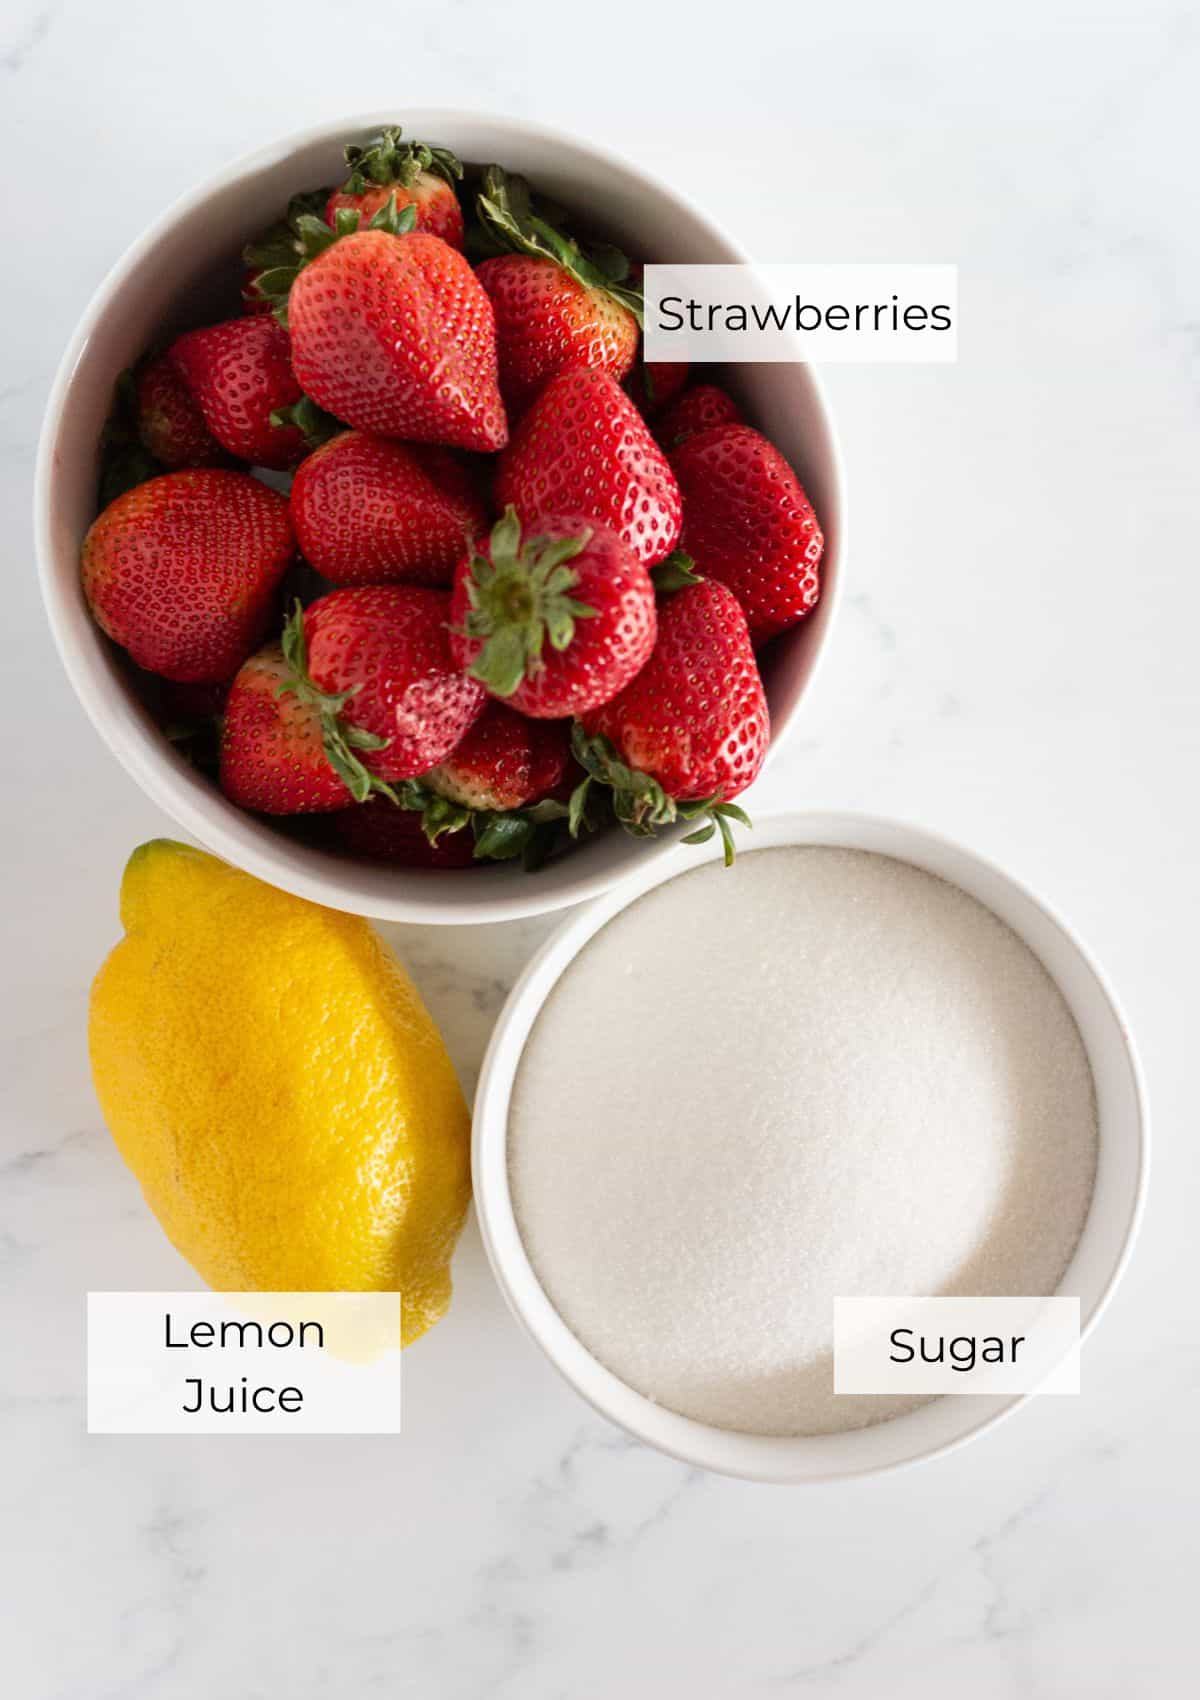 The ingredients needed to make strawberry jam without pectin.